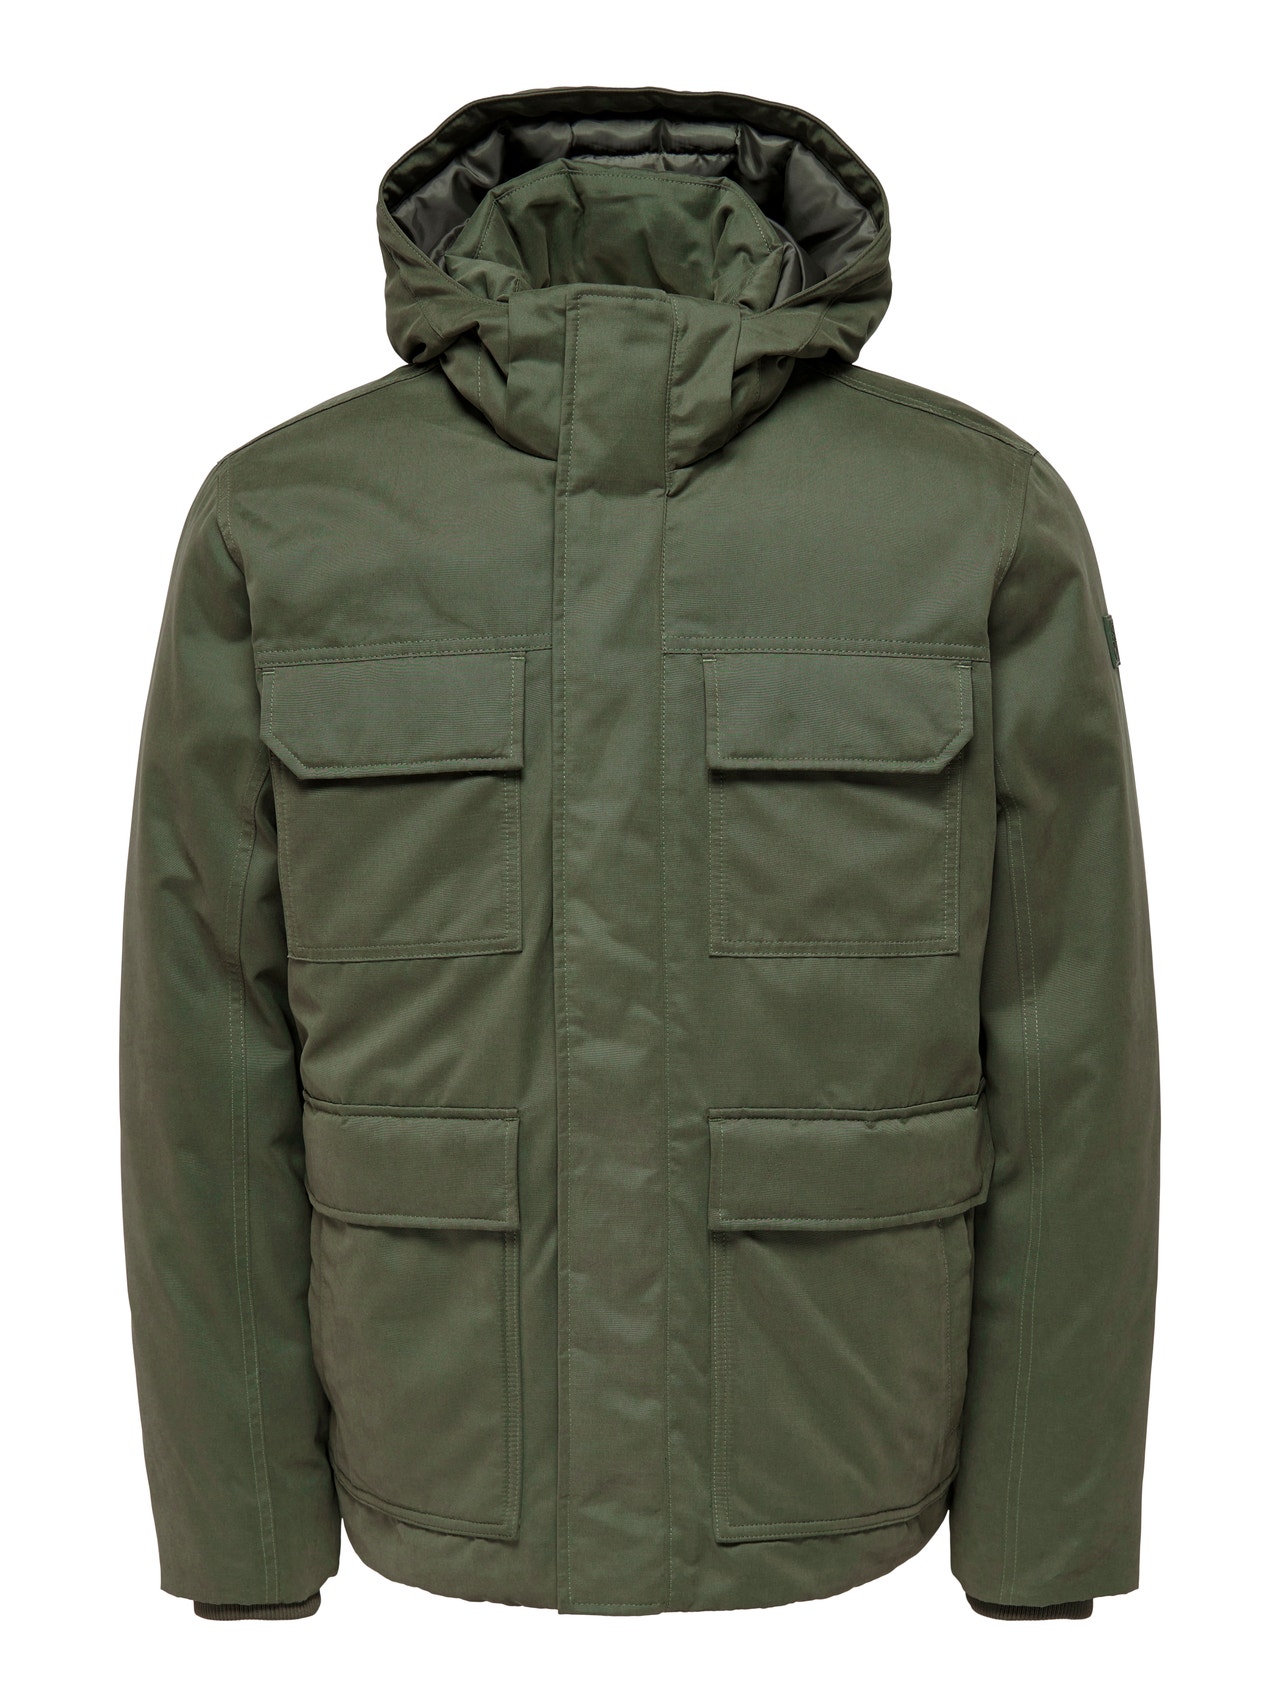 ONLY & SONS Hood with string regulation Jacket -Olive Night - 22022466